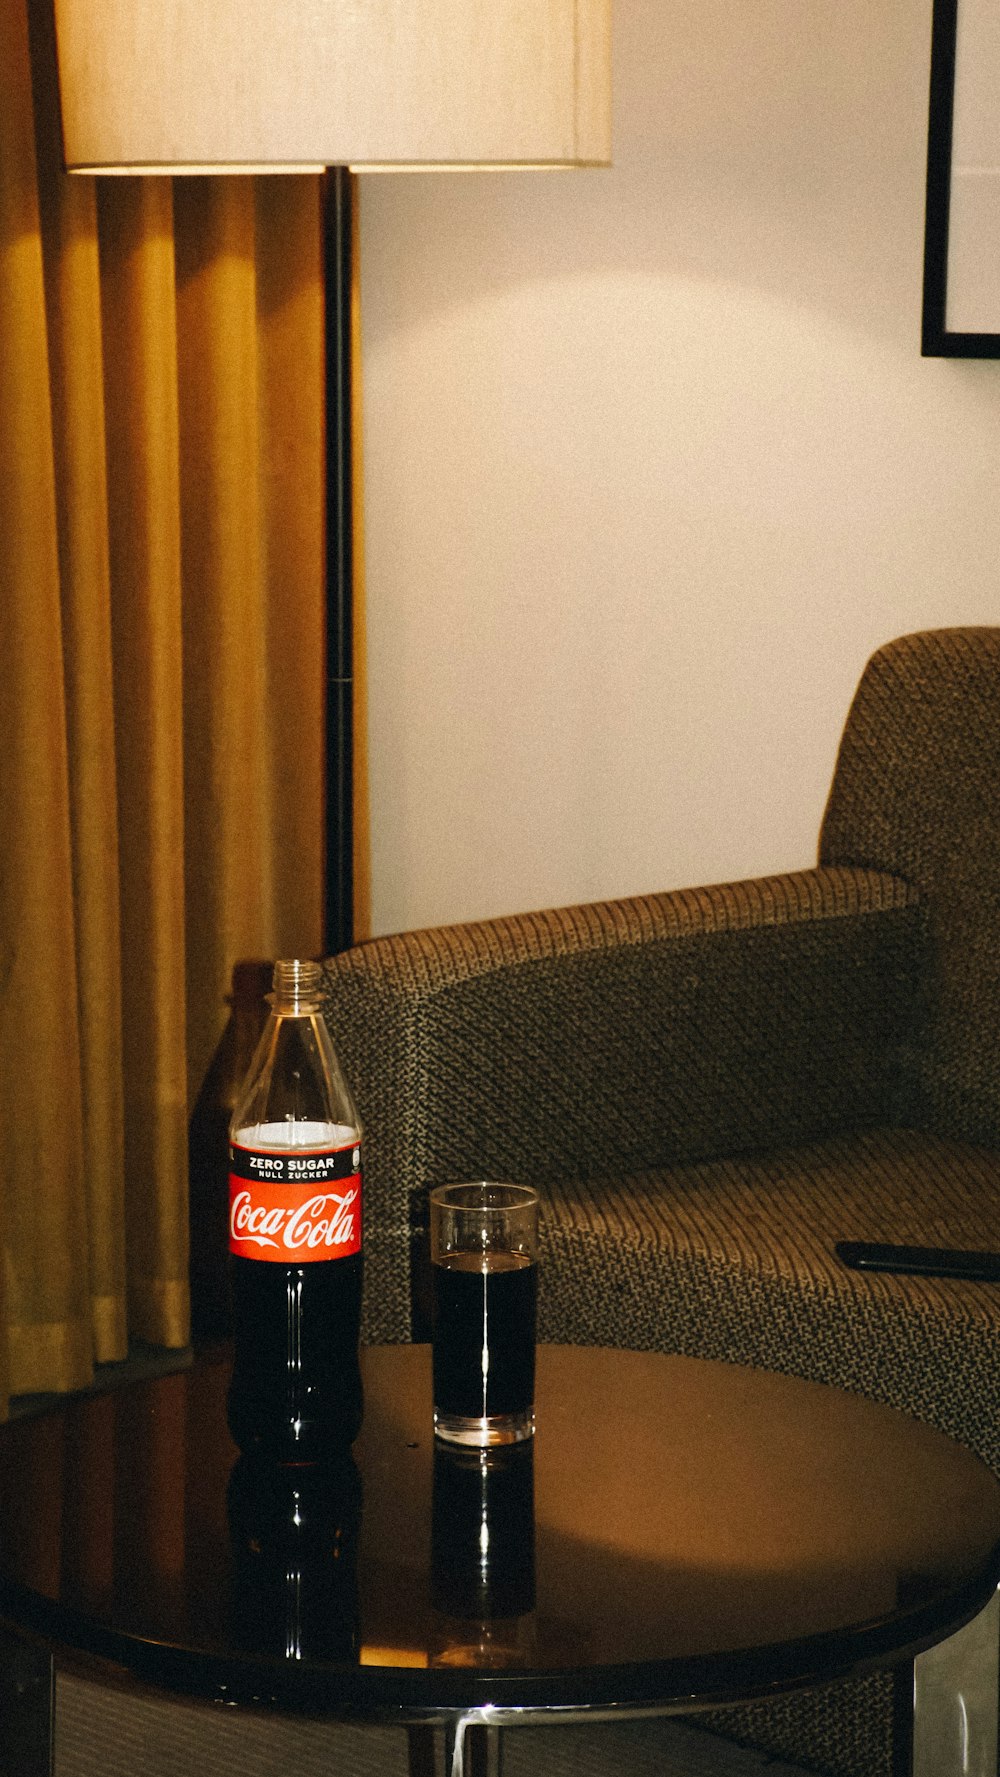 a coca cola bottle sitting on top of a table next to a glass